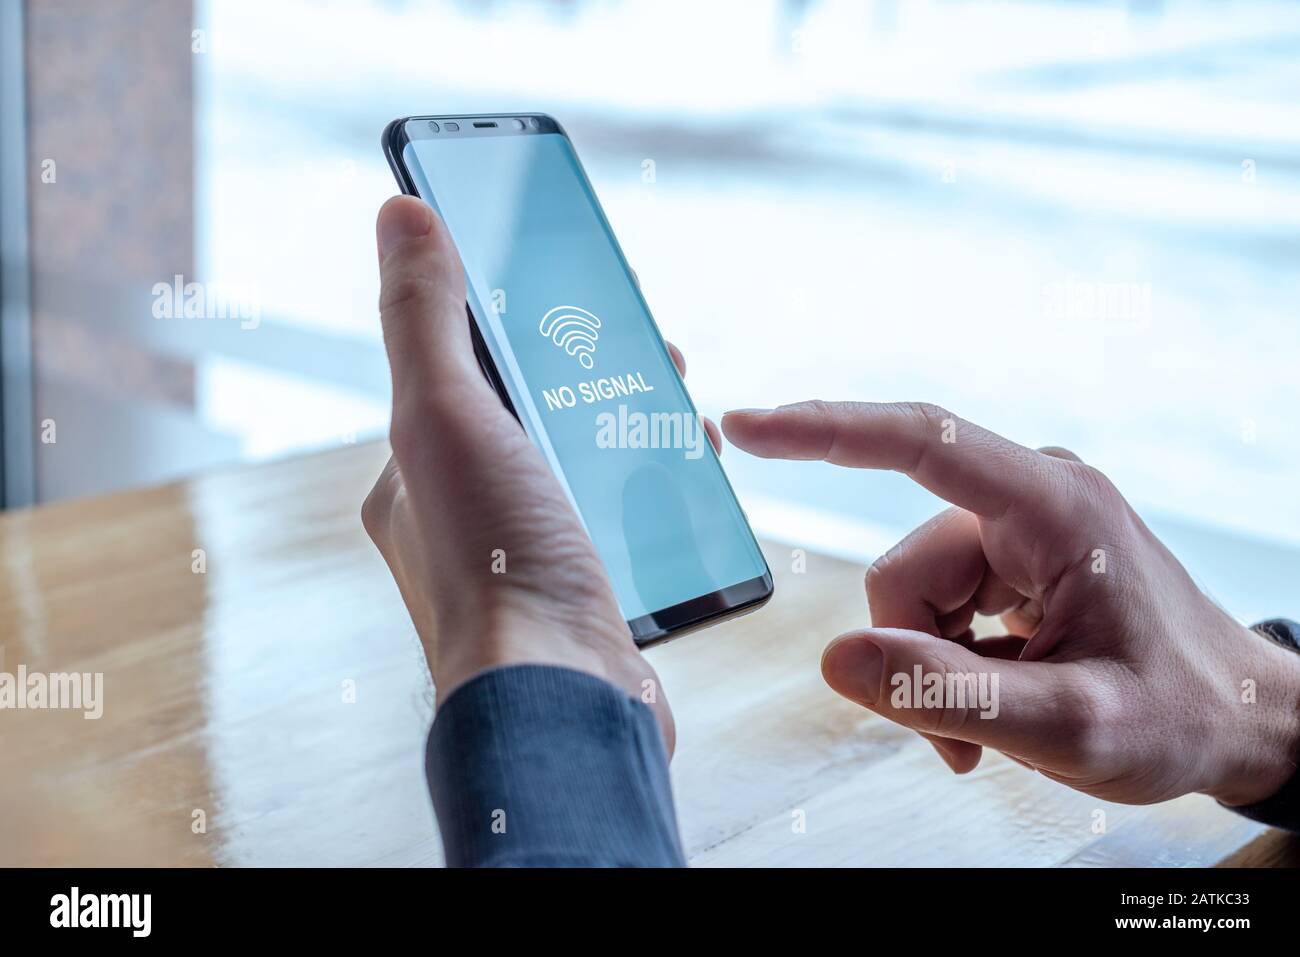 No Wi-Fi signal message on phone display. Concept of intermittent signal  due to router or mobile network error Stock Photo - Alamy